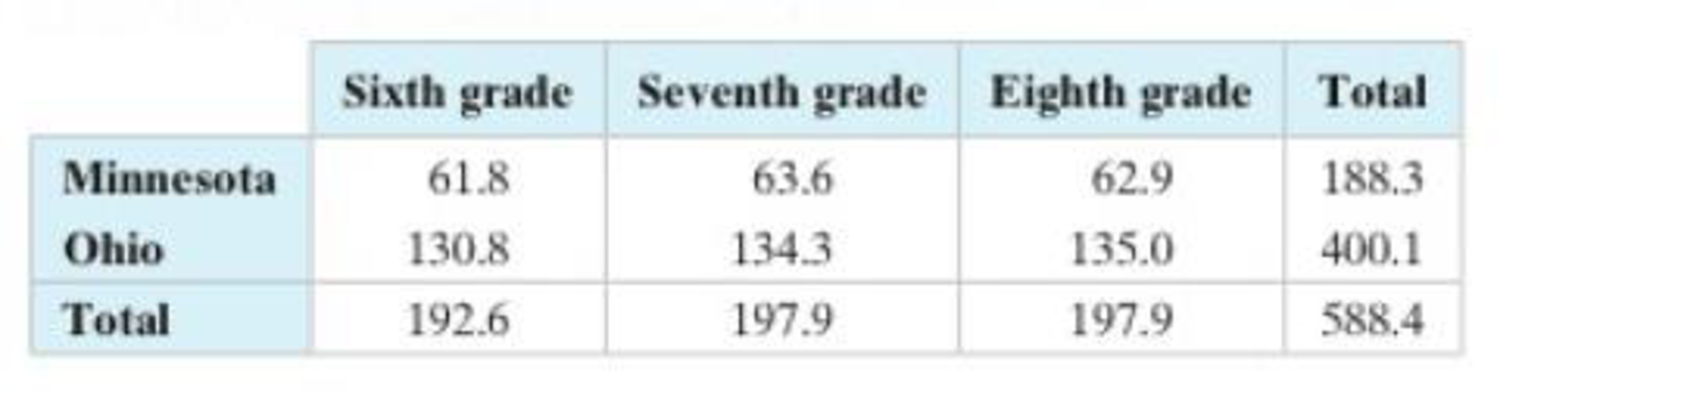 Chapter 3, Problem 4CT, The table shows the sixth, seventh, and eighth grade student enrollment levels (in thousands) in 